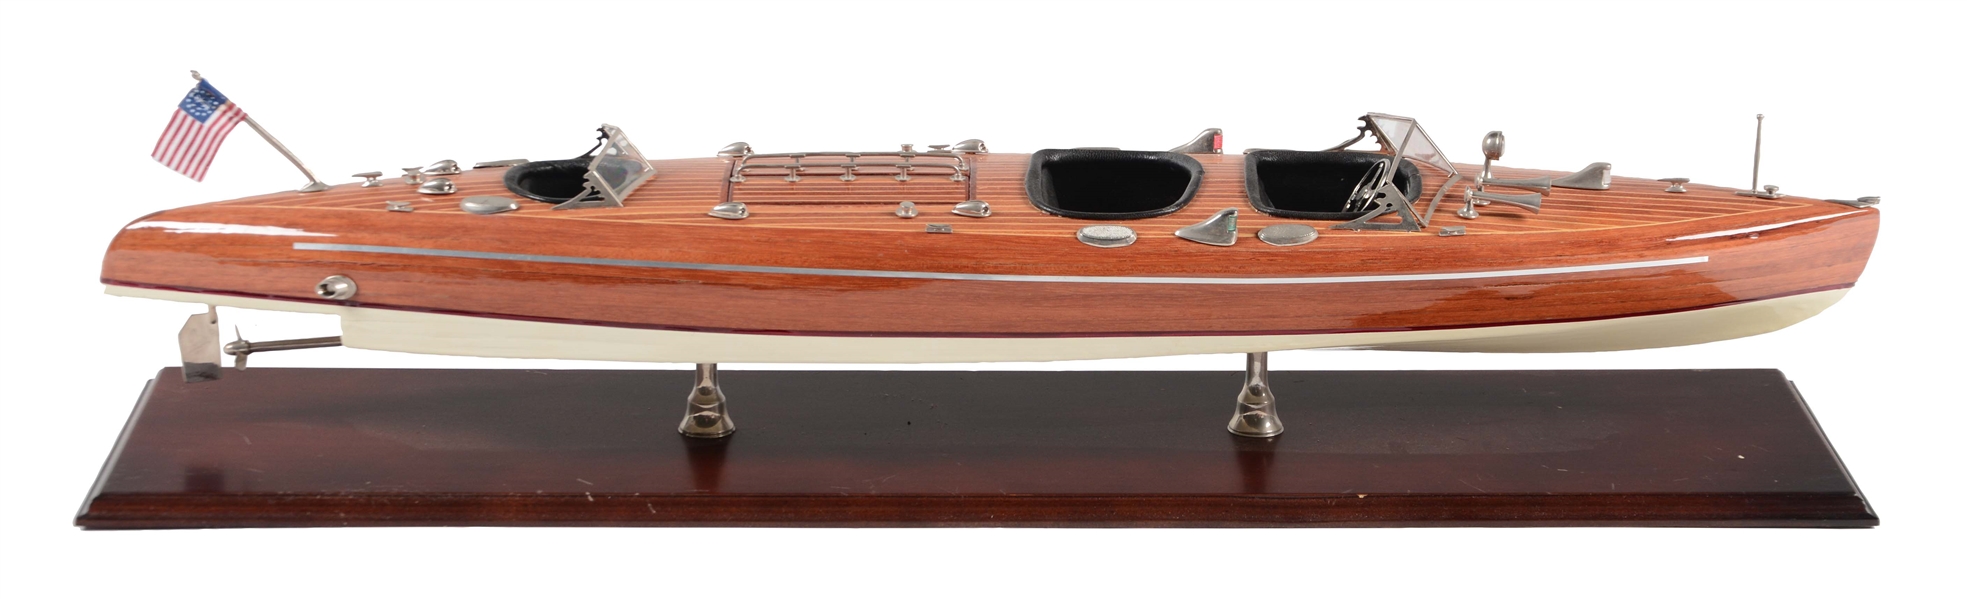 CONTEMPORARY WOODEN MODEL SPEED BOAT WITH AMERICAN FLAG ON STAND.